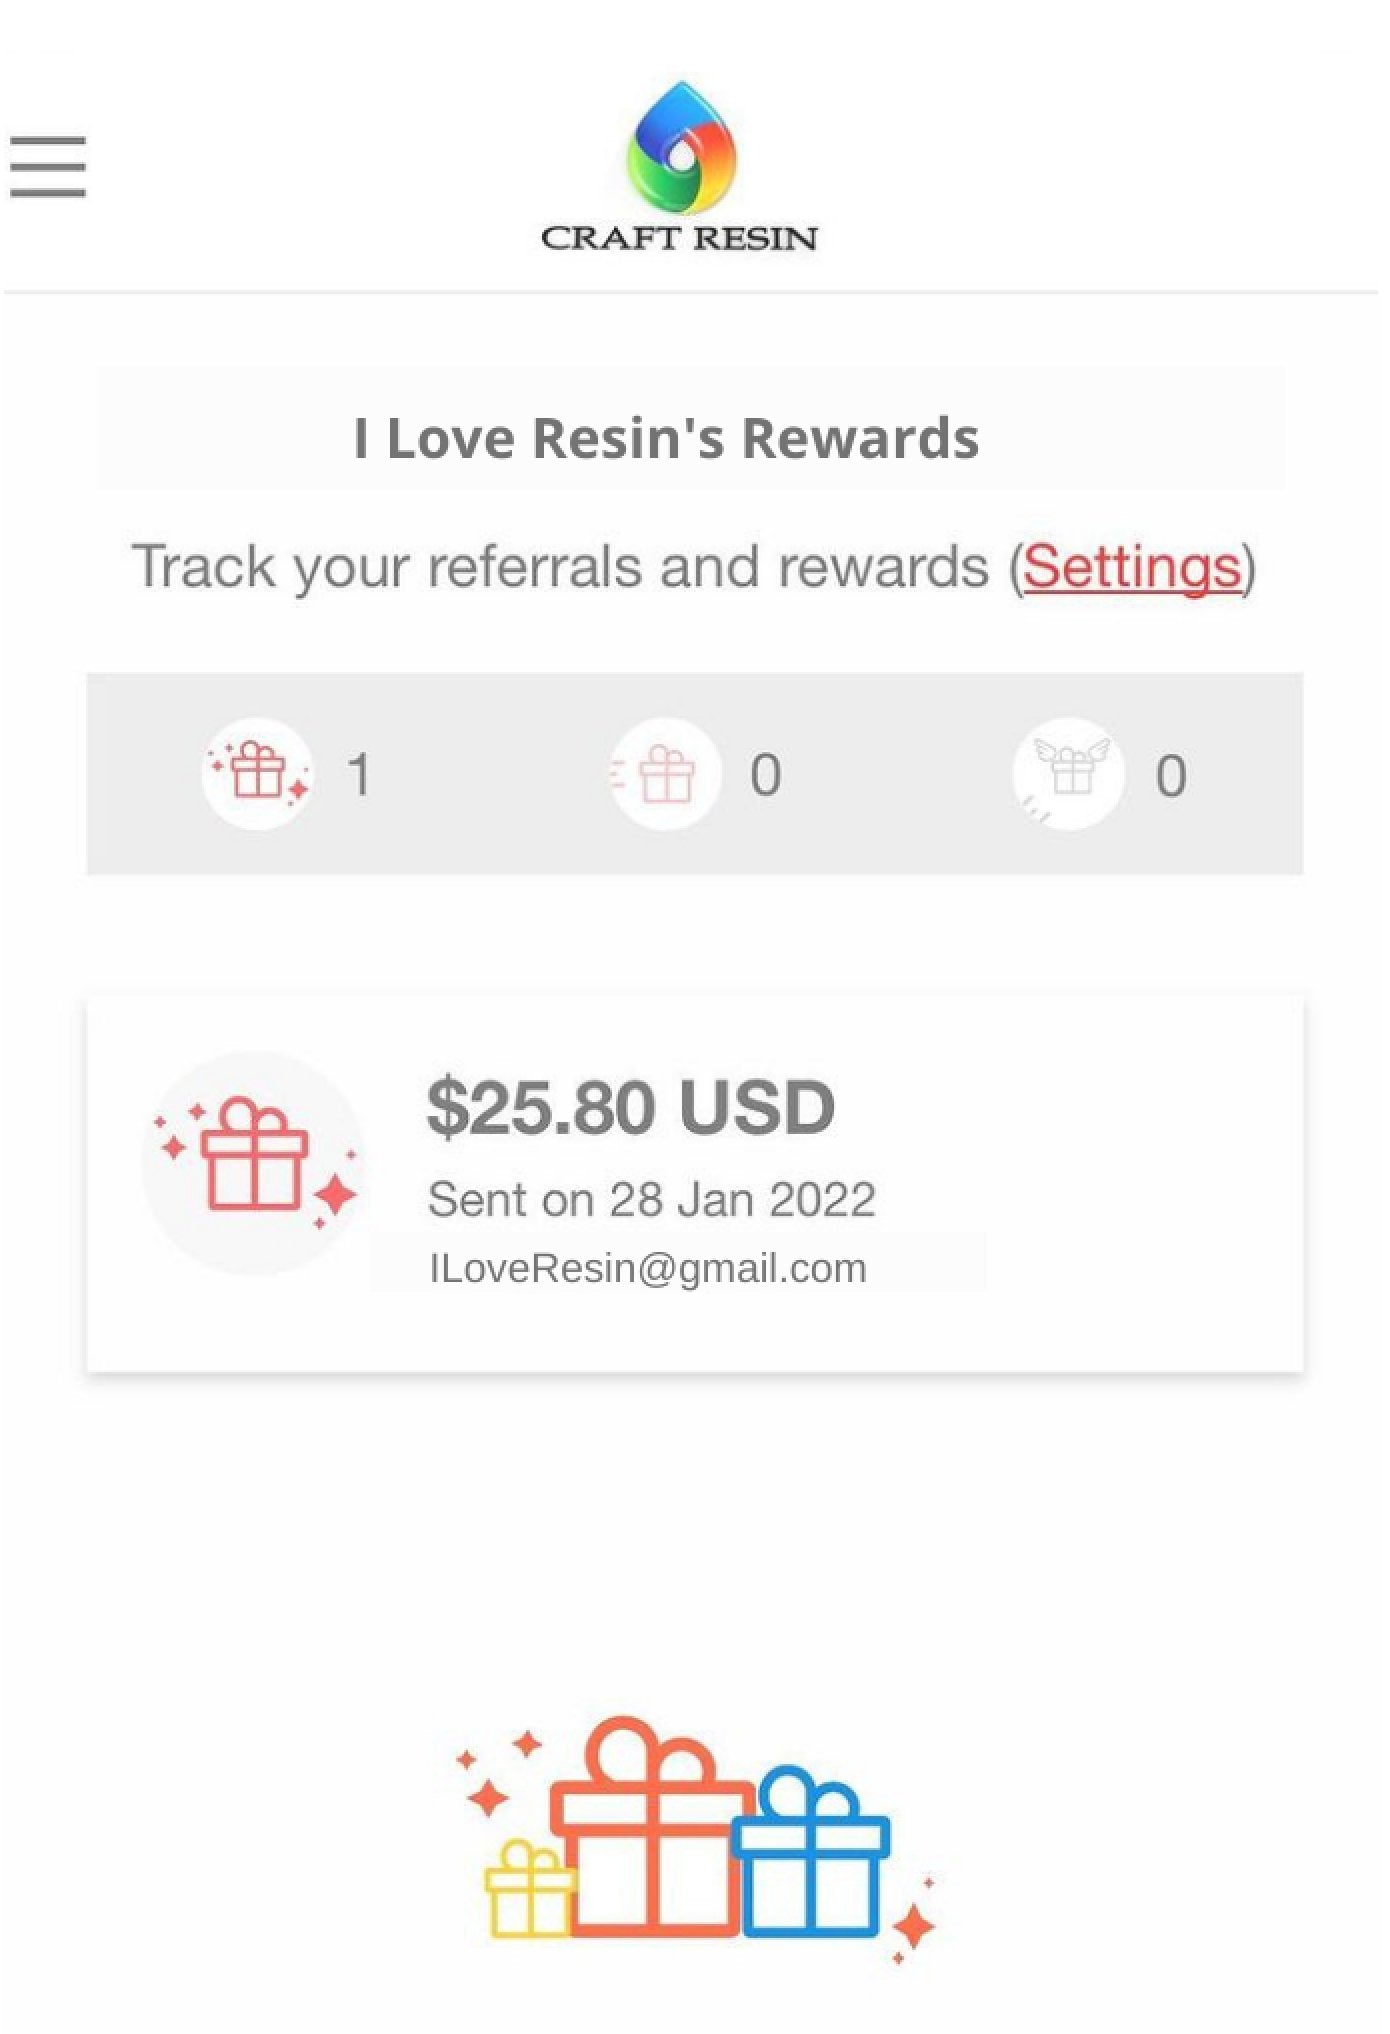 How To Check If Anyone Has Shopped For Craft Resin Through Your Referral Link? - Craft Resin